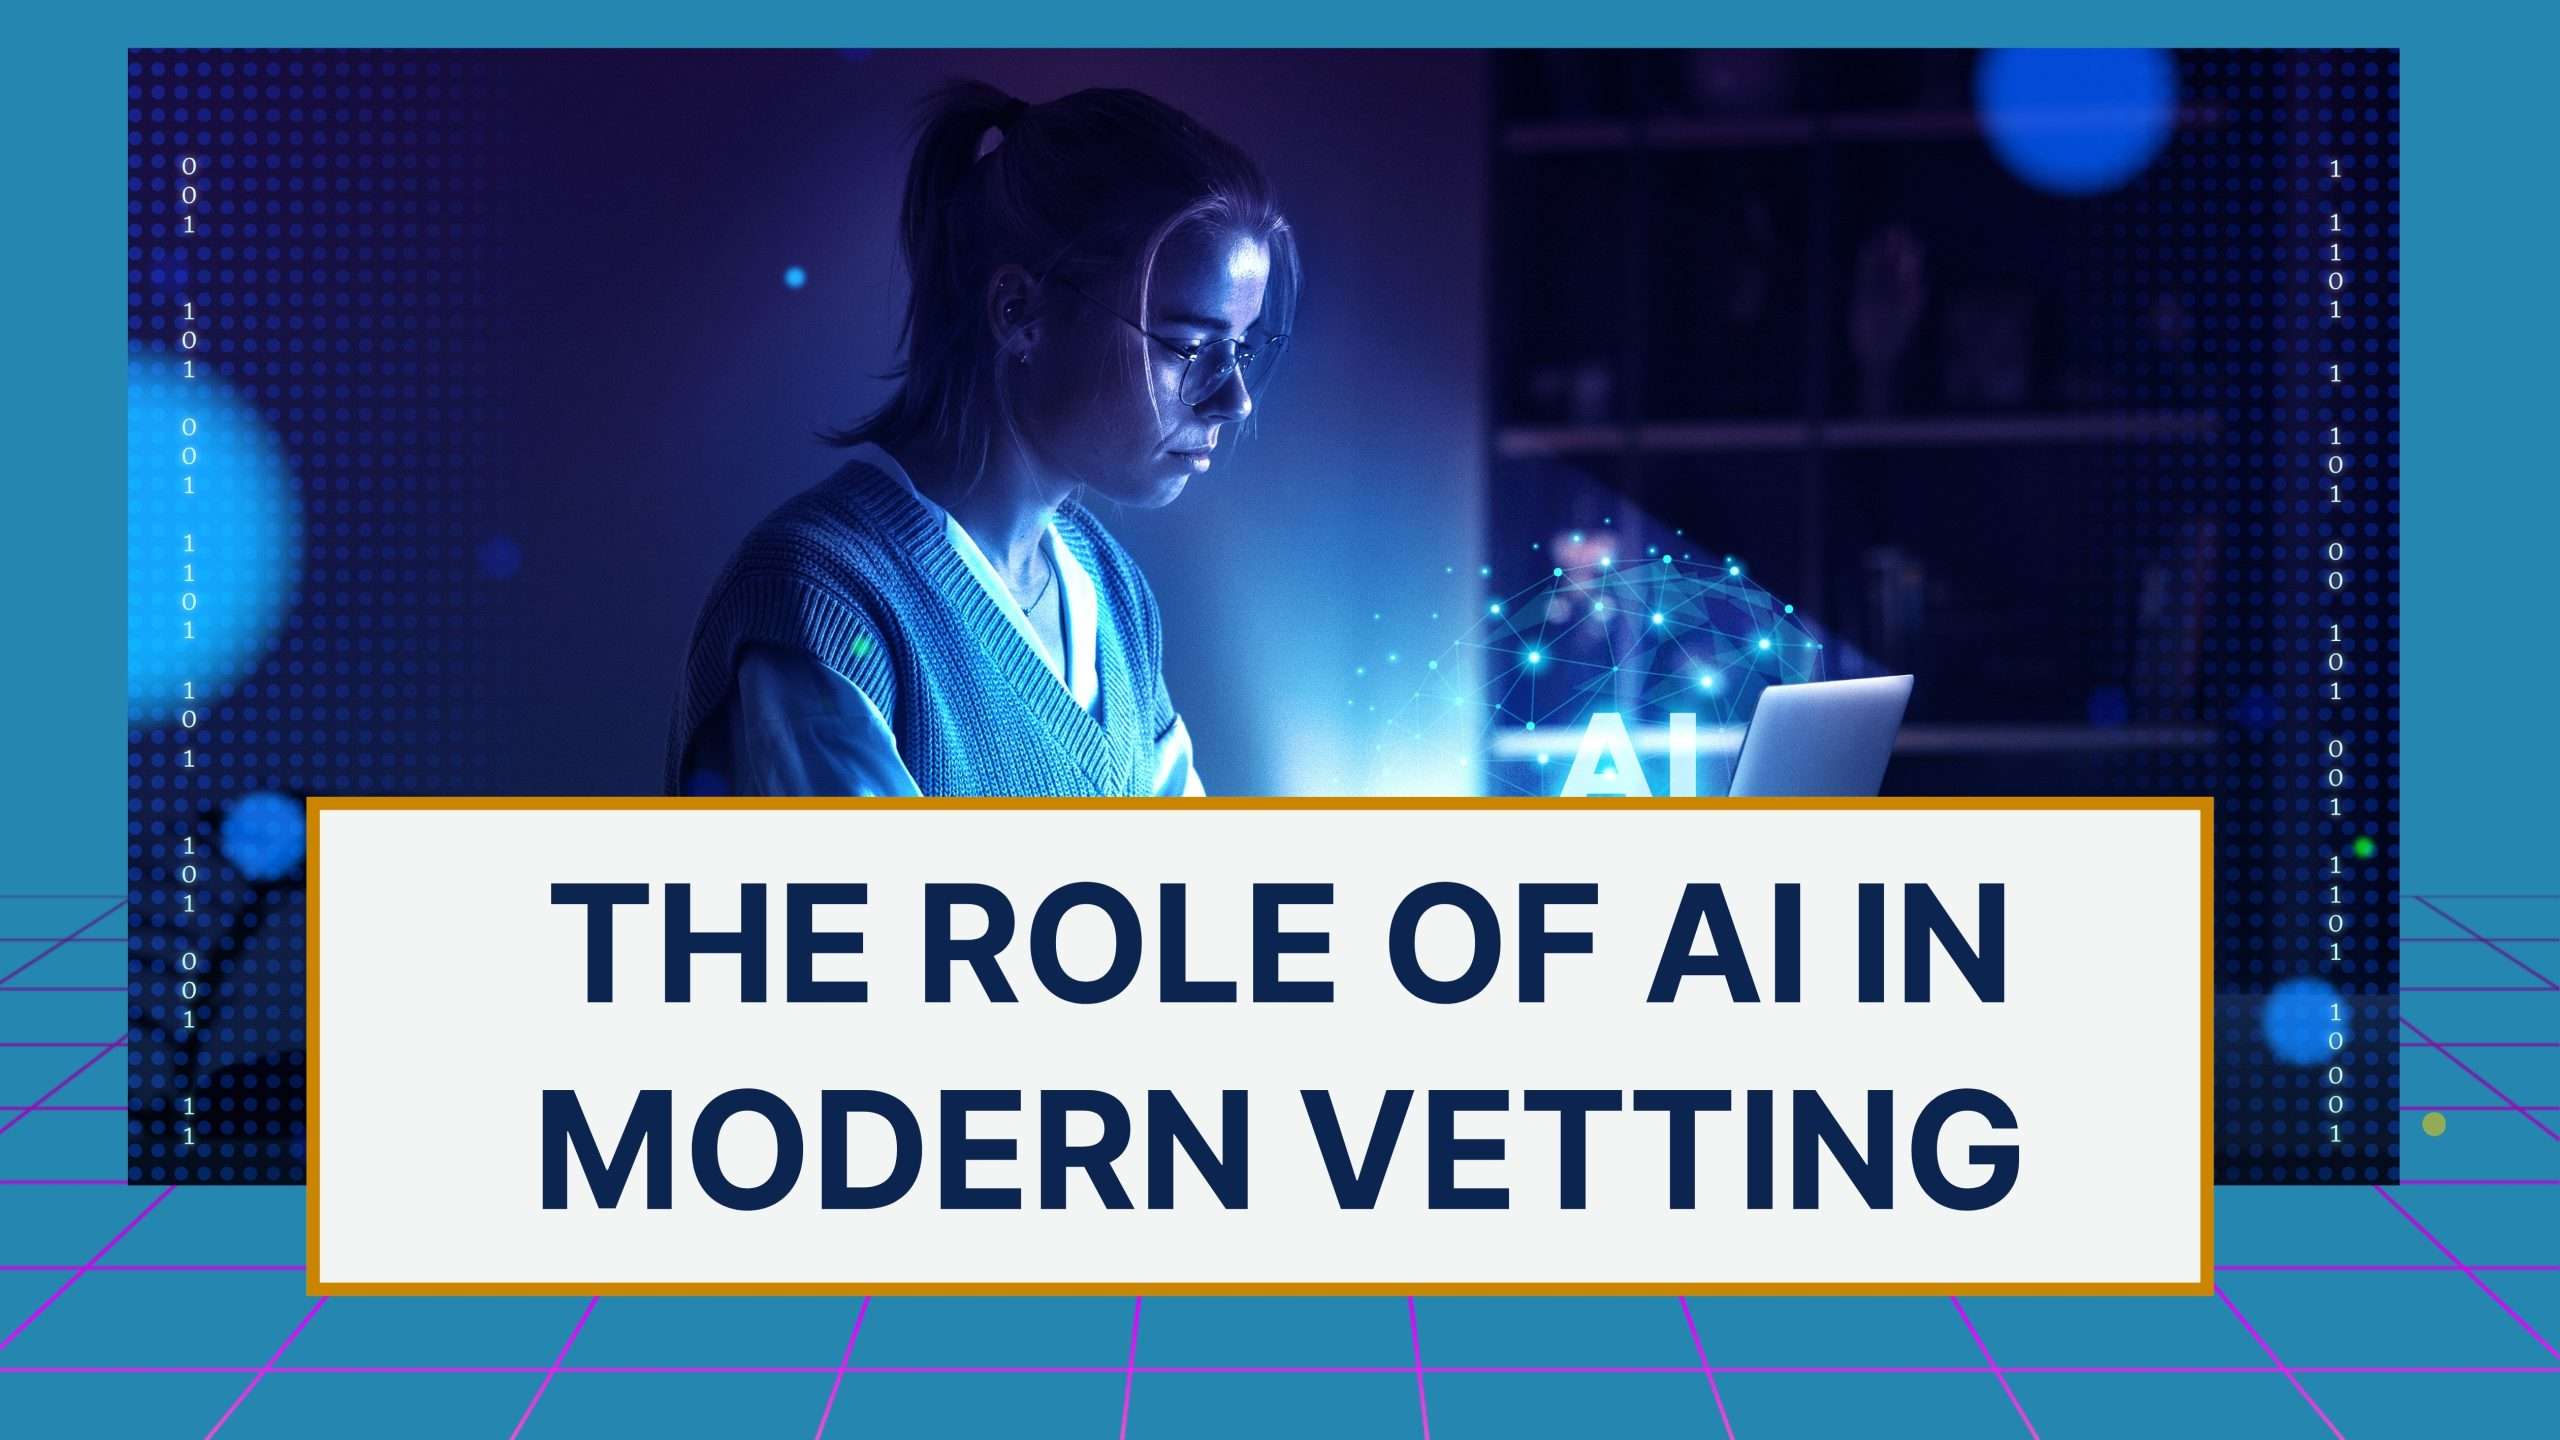 The Role of AI in Modern Vetting